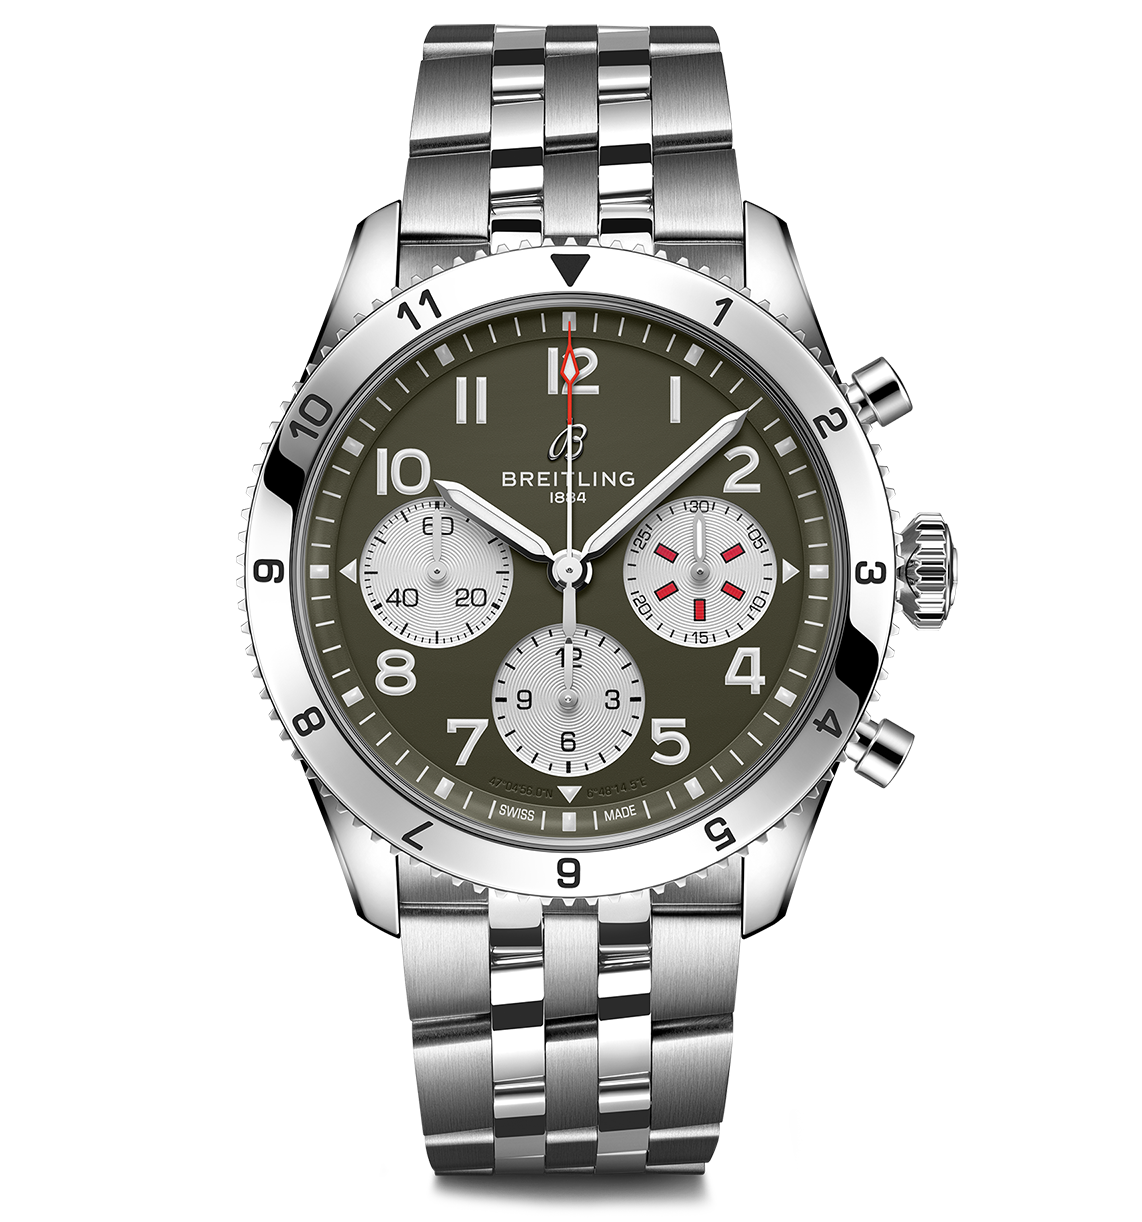 Breitling Classic AVI Chronograph 42 Curtiss Warhawk Watch with Stainless Steel Bracelet